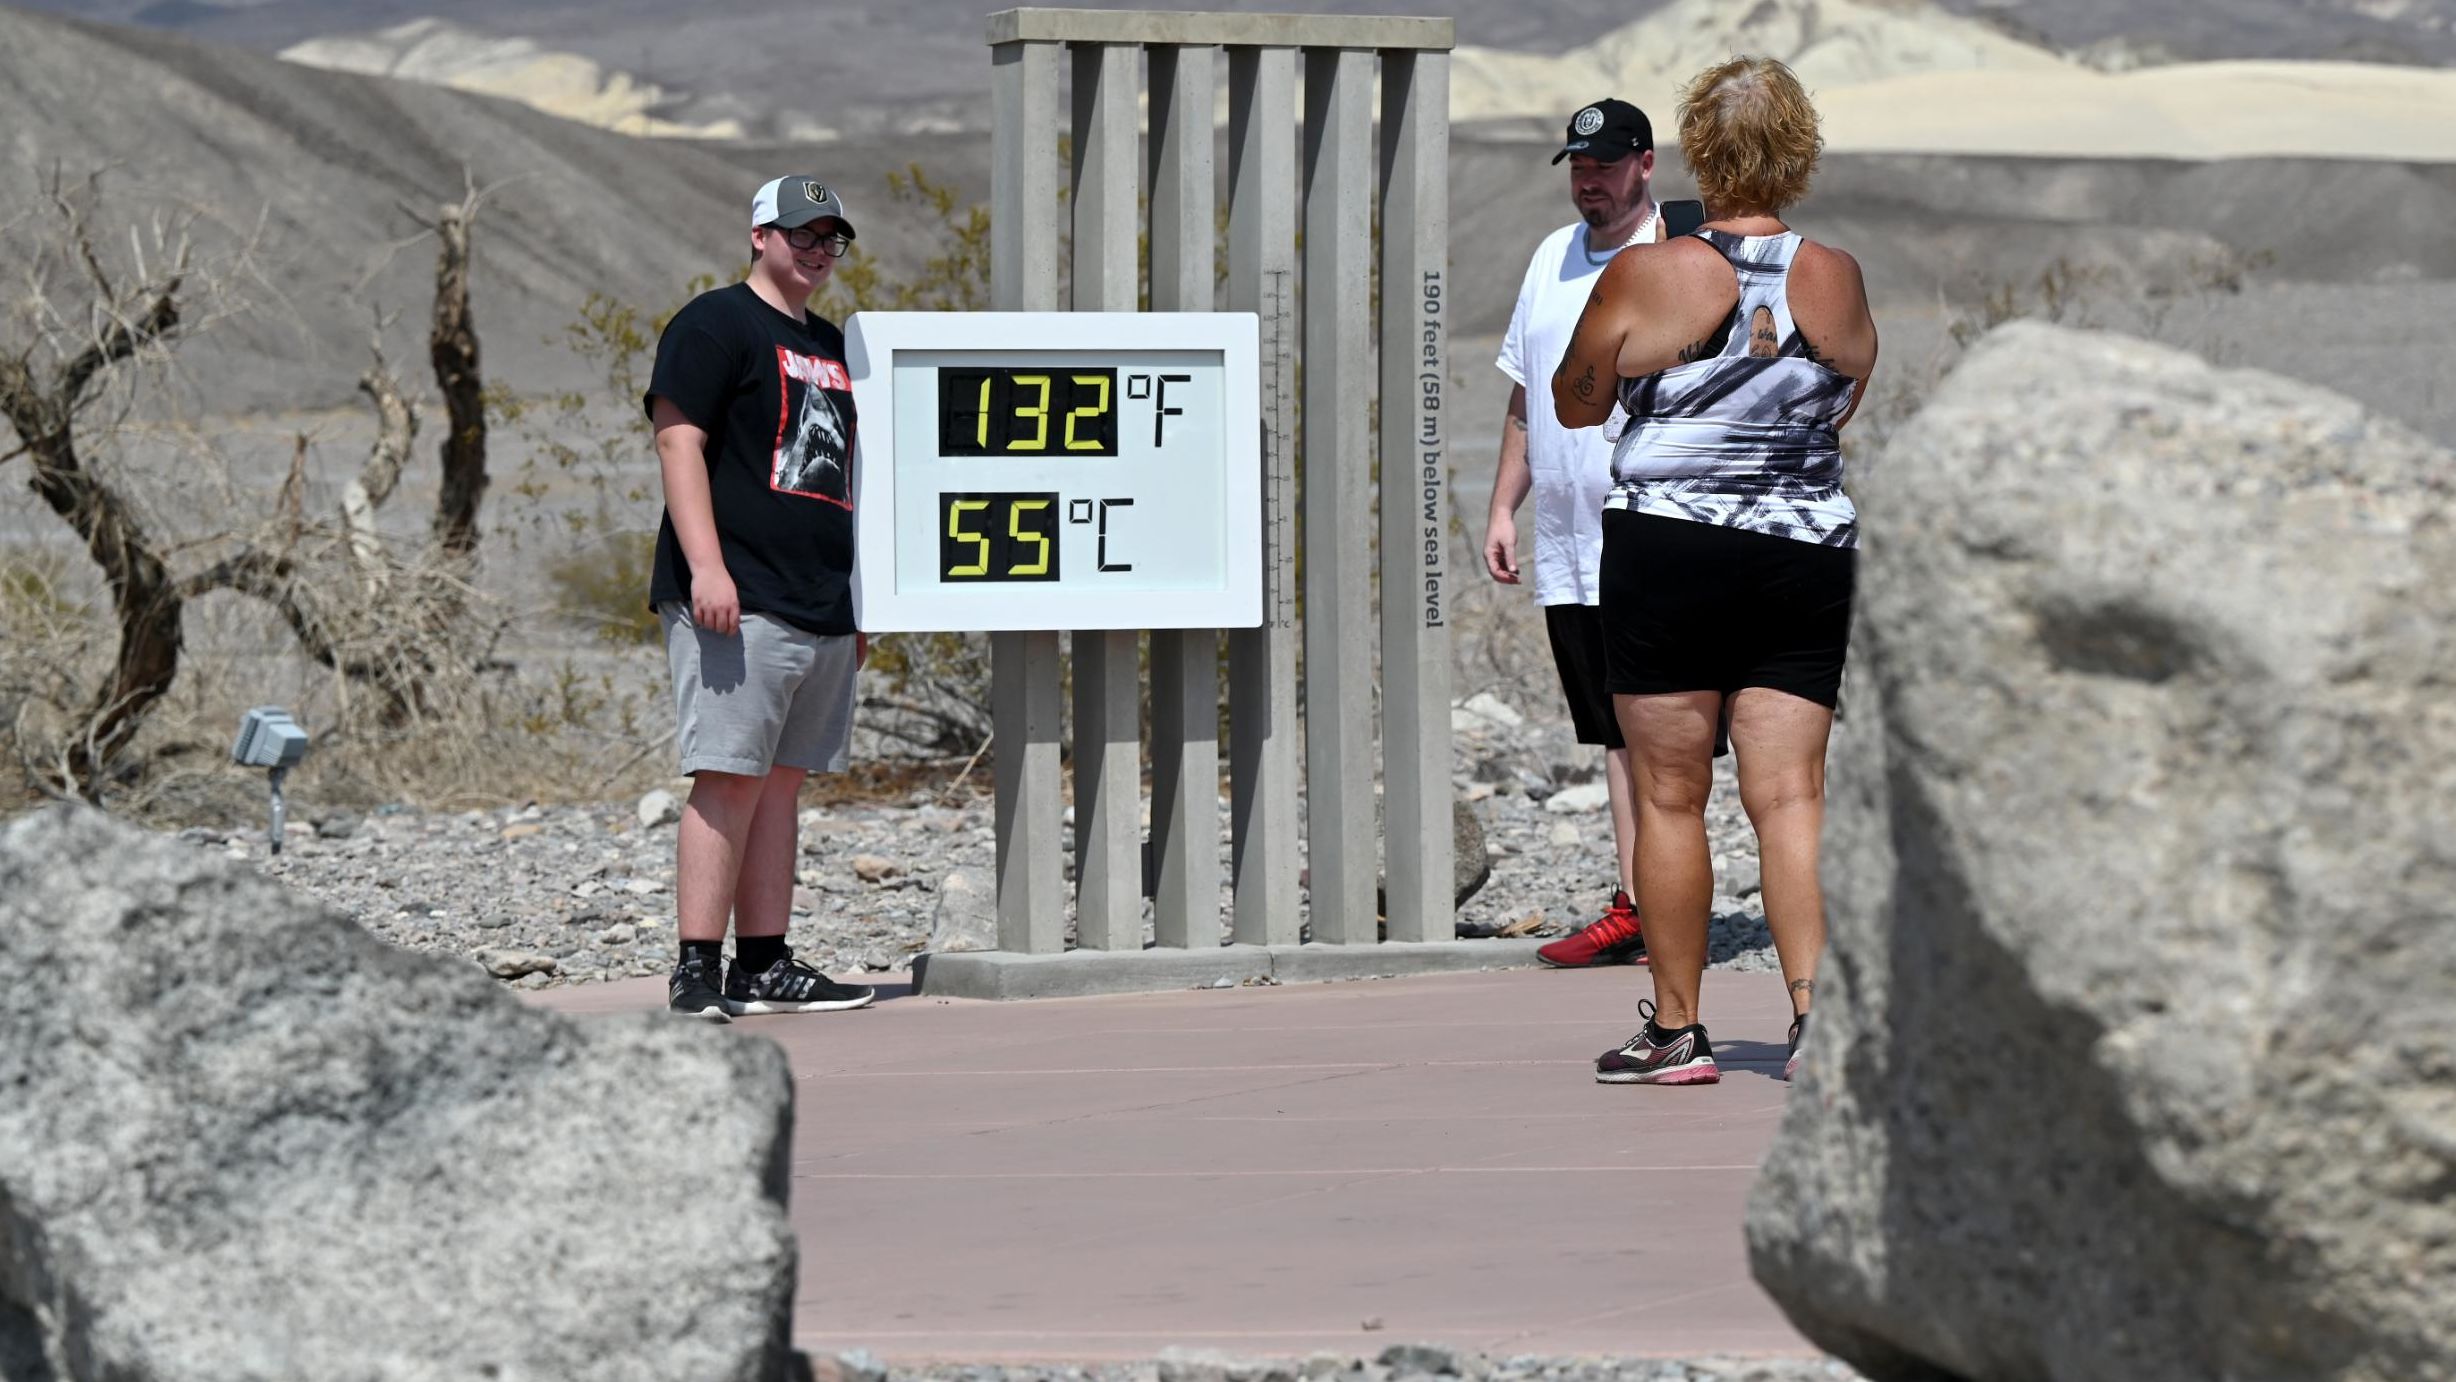 People pose by an unofficial thermometer reading 132 degrees Fahrenheit/55 degrees Celsius at Furnace Creek Visitor Center on July 11, 2021 in Death Valley National Park, California. 